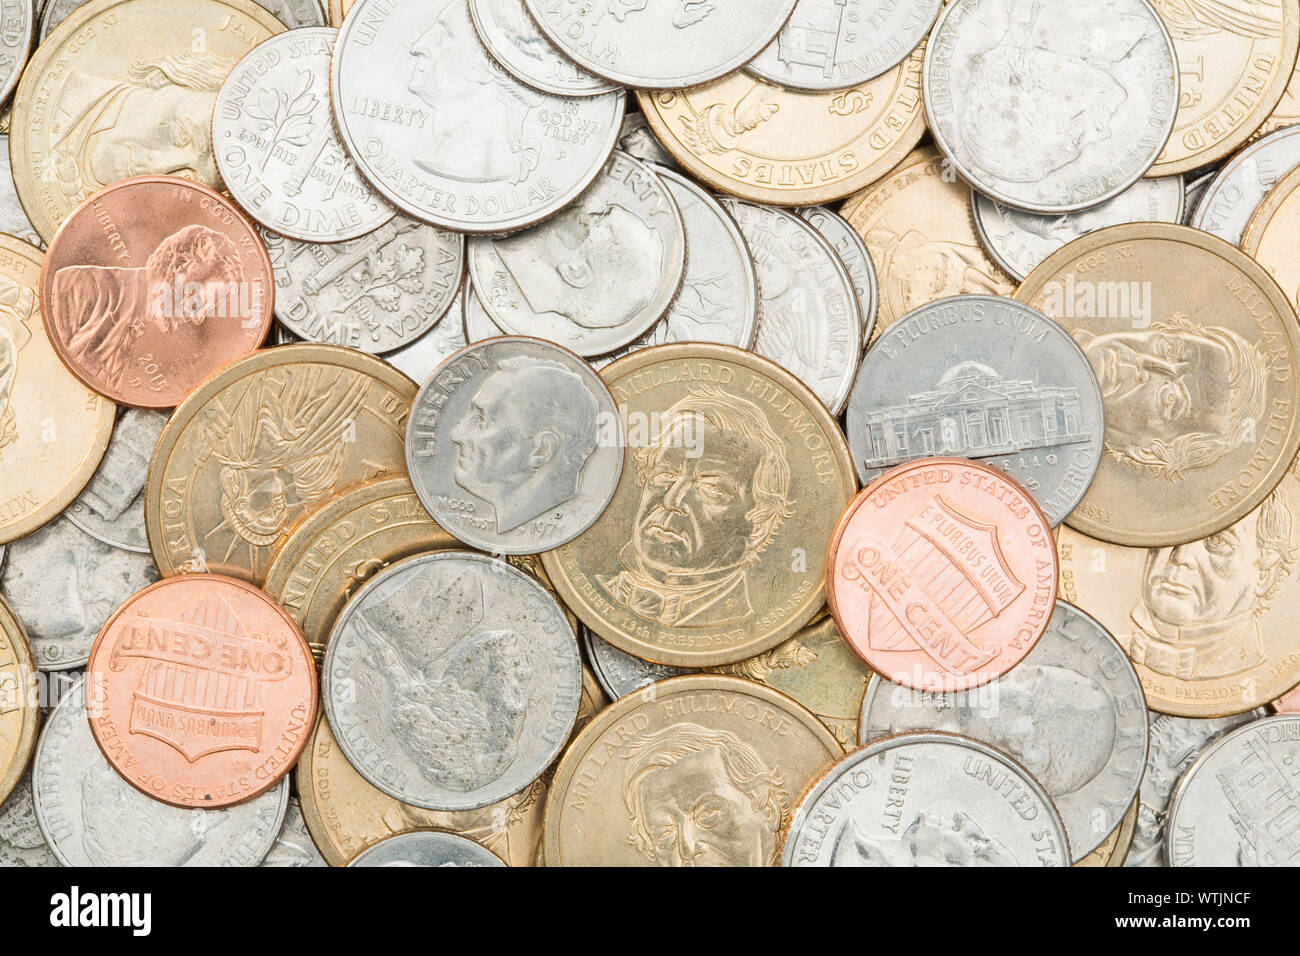 US currency coins Stock Photo